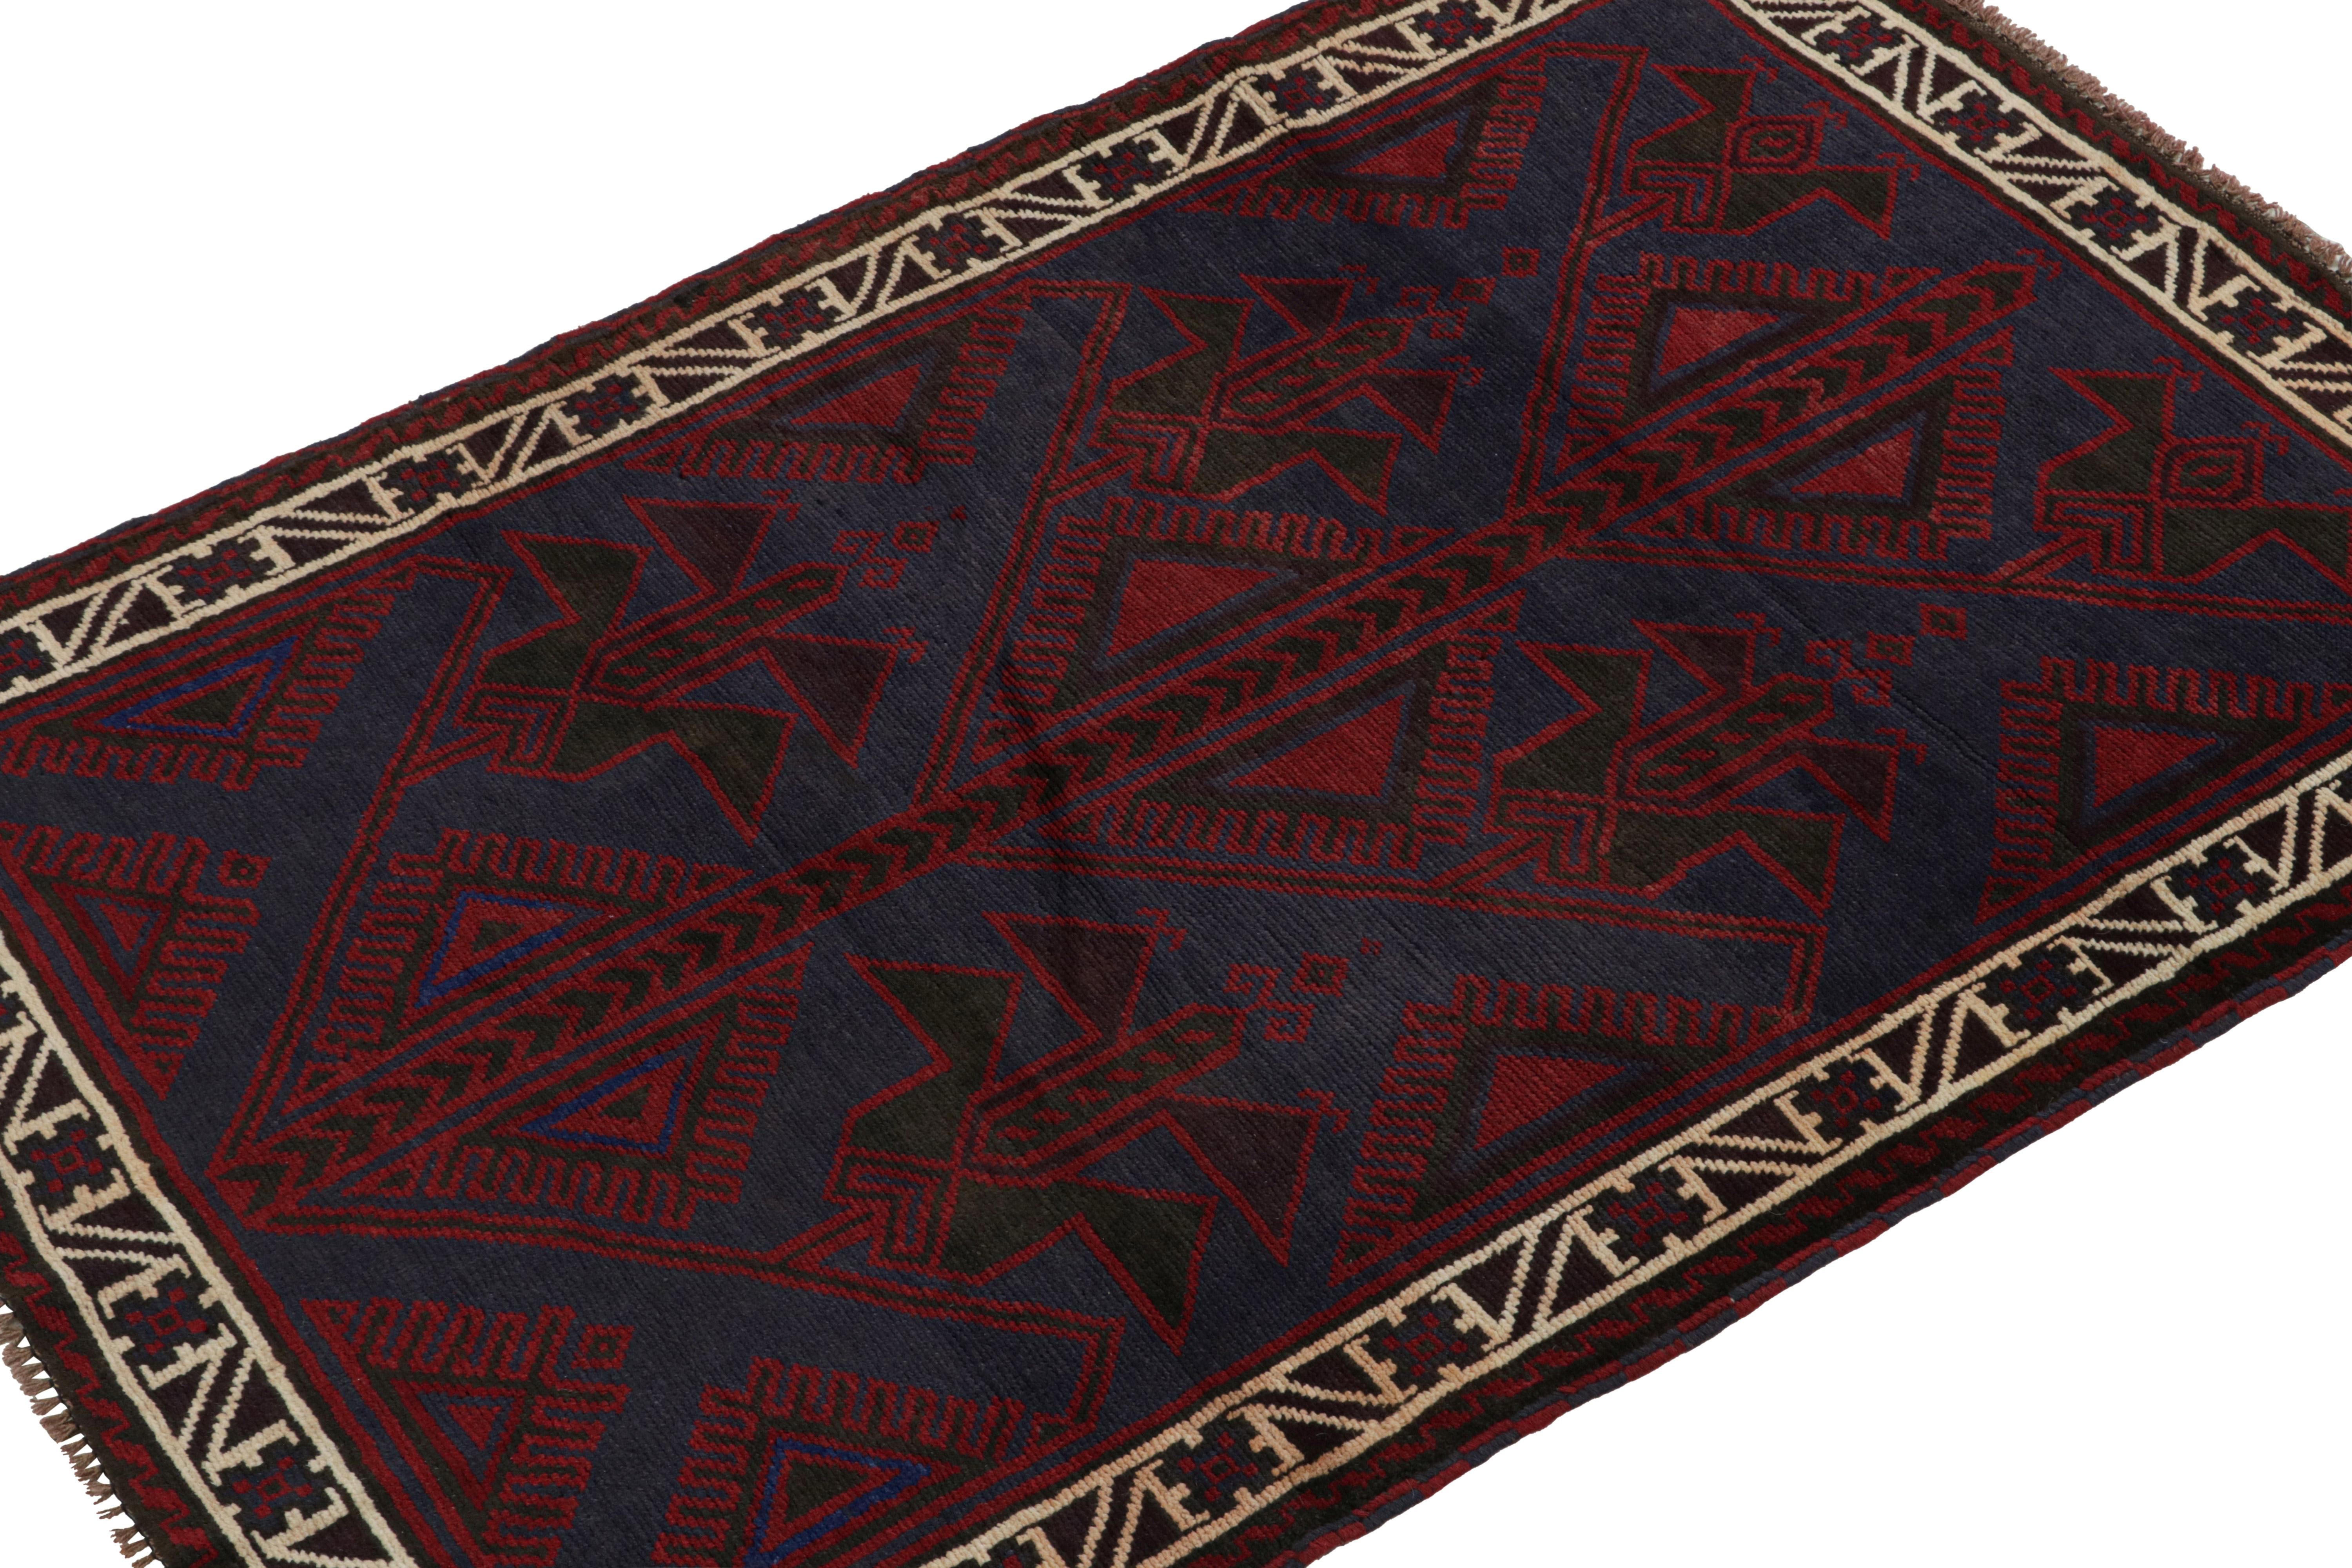 Hand-knotted in wool and goat hair circa 1950-1960, this 4x6 vintage Baluch tribal rug is a new curation from Rug & Kilim.

On the Design: 

This piece enjoys red and blue geometric patterns, and a rich border with a meander. Its colors are